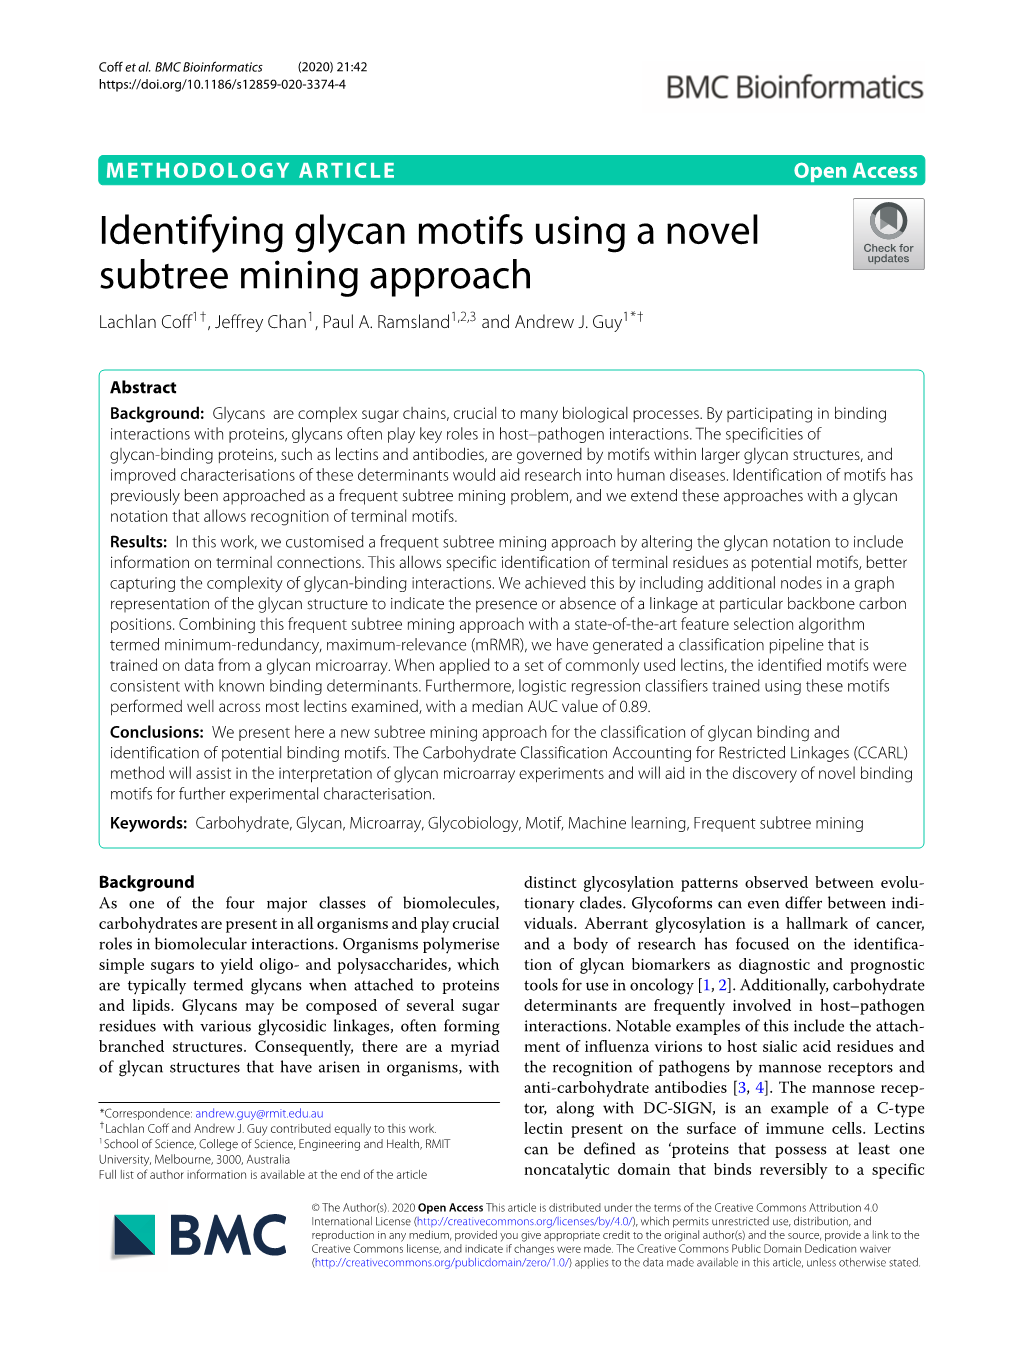 View a Set of Glycans, Frequent Subtree Mining Approaches Have to Identify Key Binding Motifs from a Glycan Microarray Been Employed by Other Researchers [13, 14]